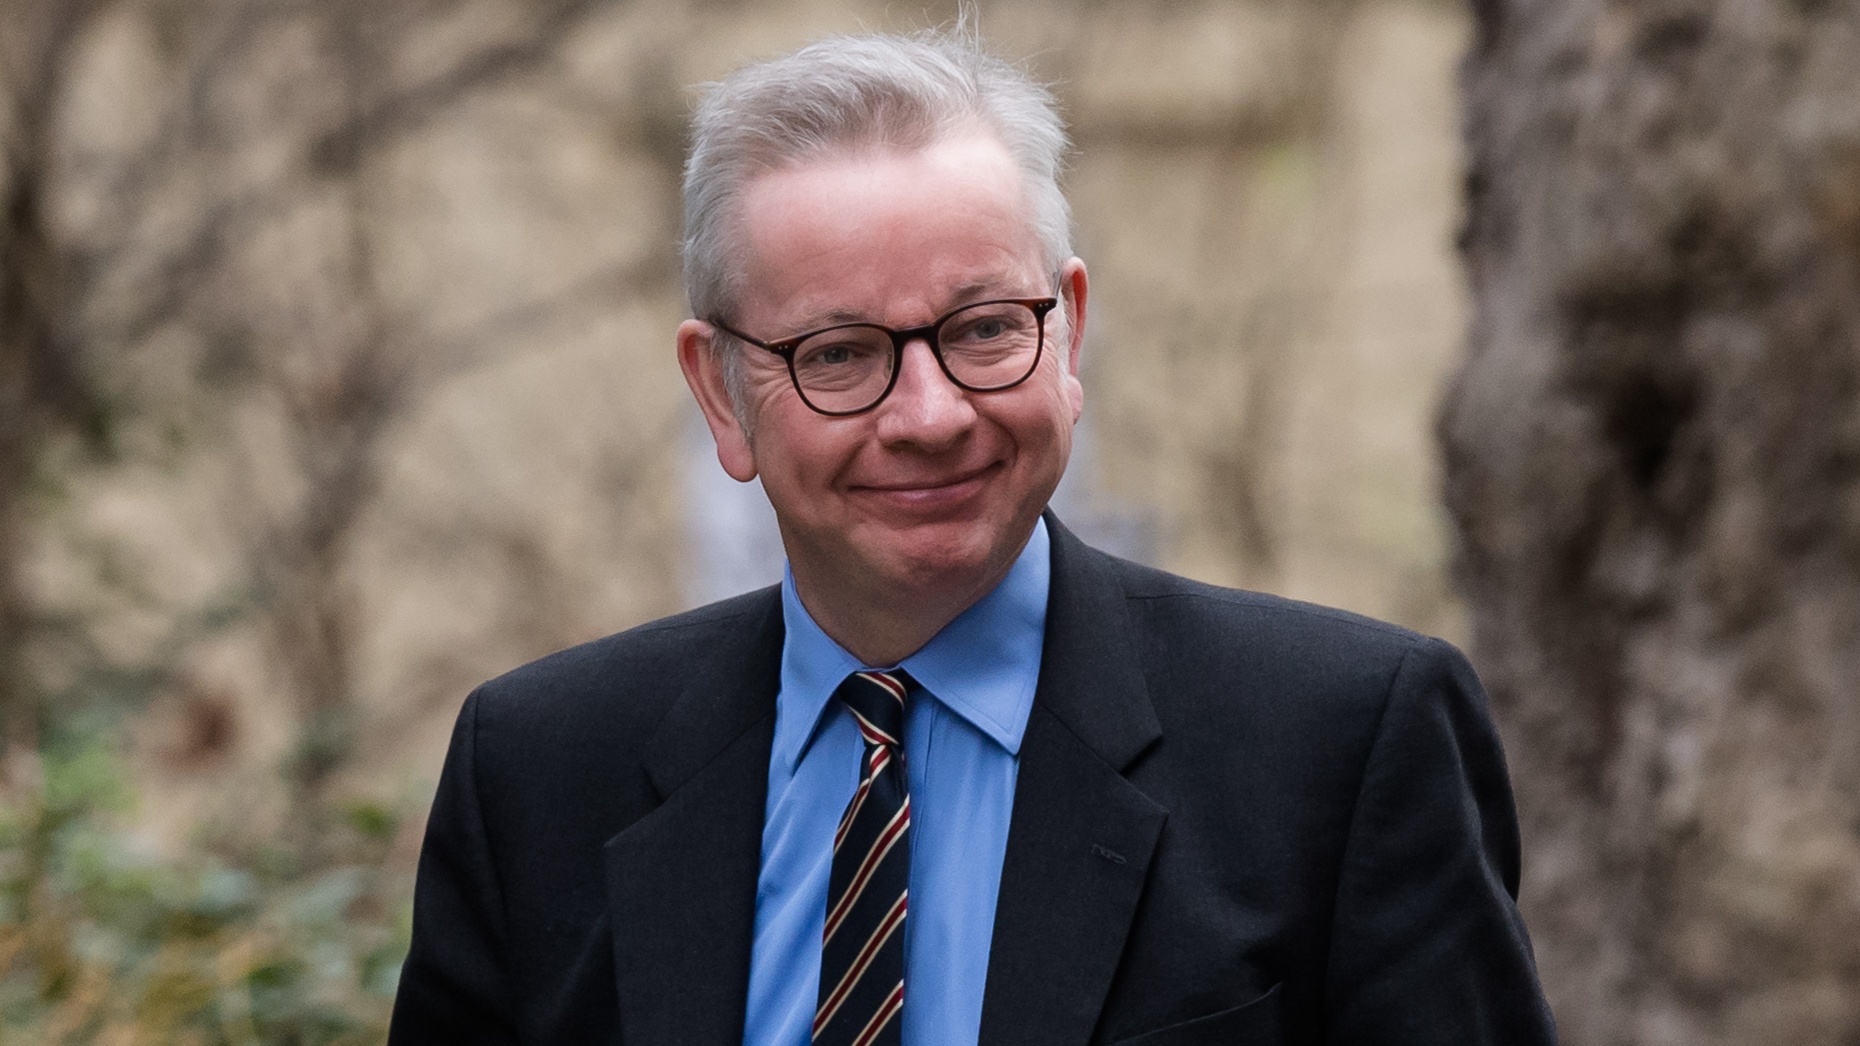 Michael Gove was education secretary at the time of the scandal